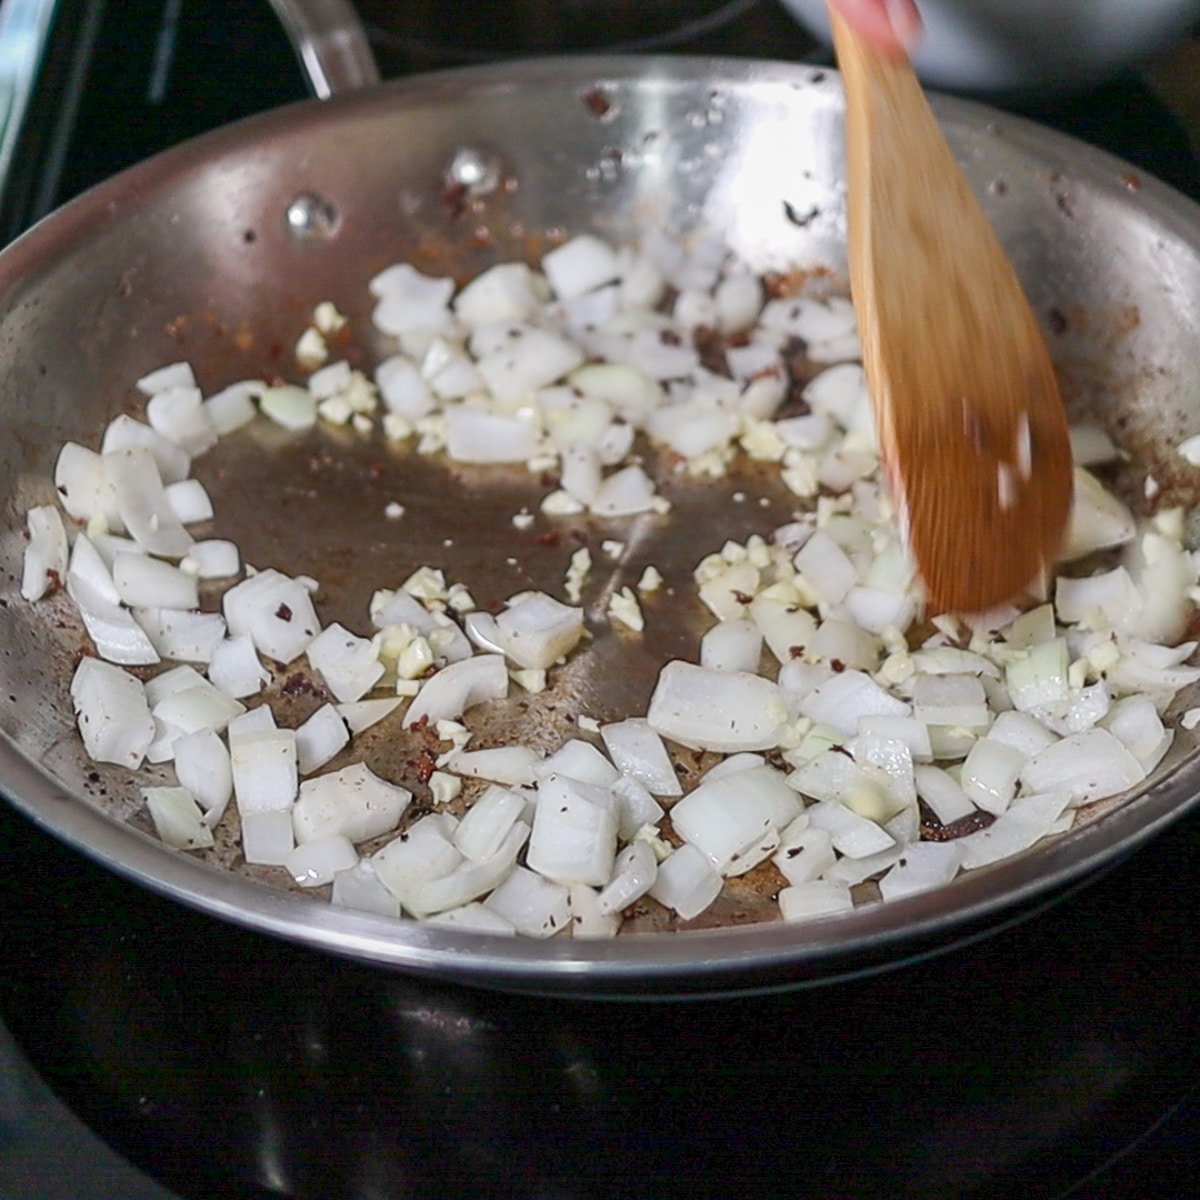 garlic and onions being sauted
